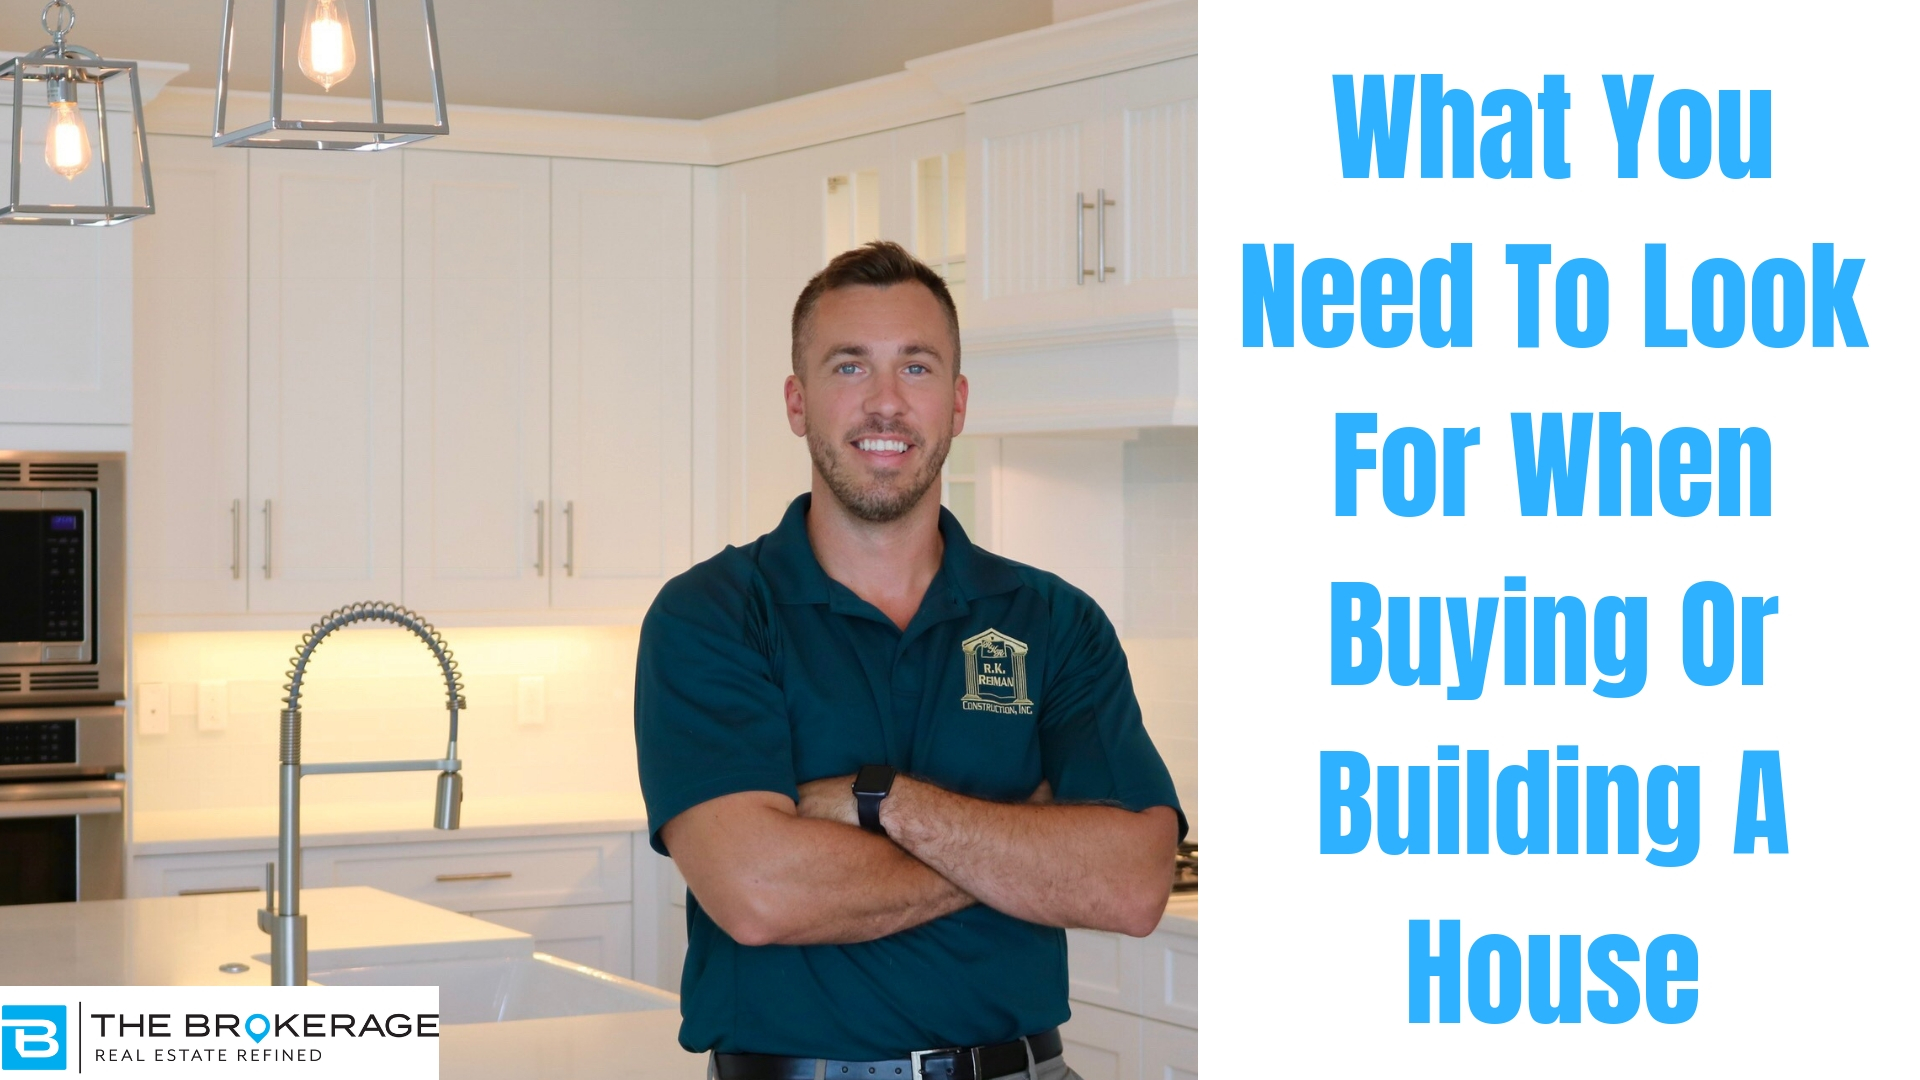 WHAT TO LOOK FOR WHEN BUYING OR BUILDING A HOUSE